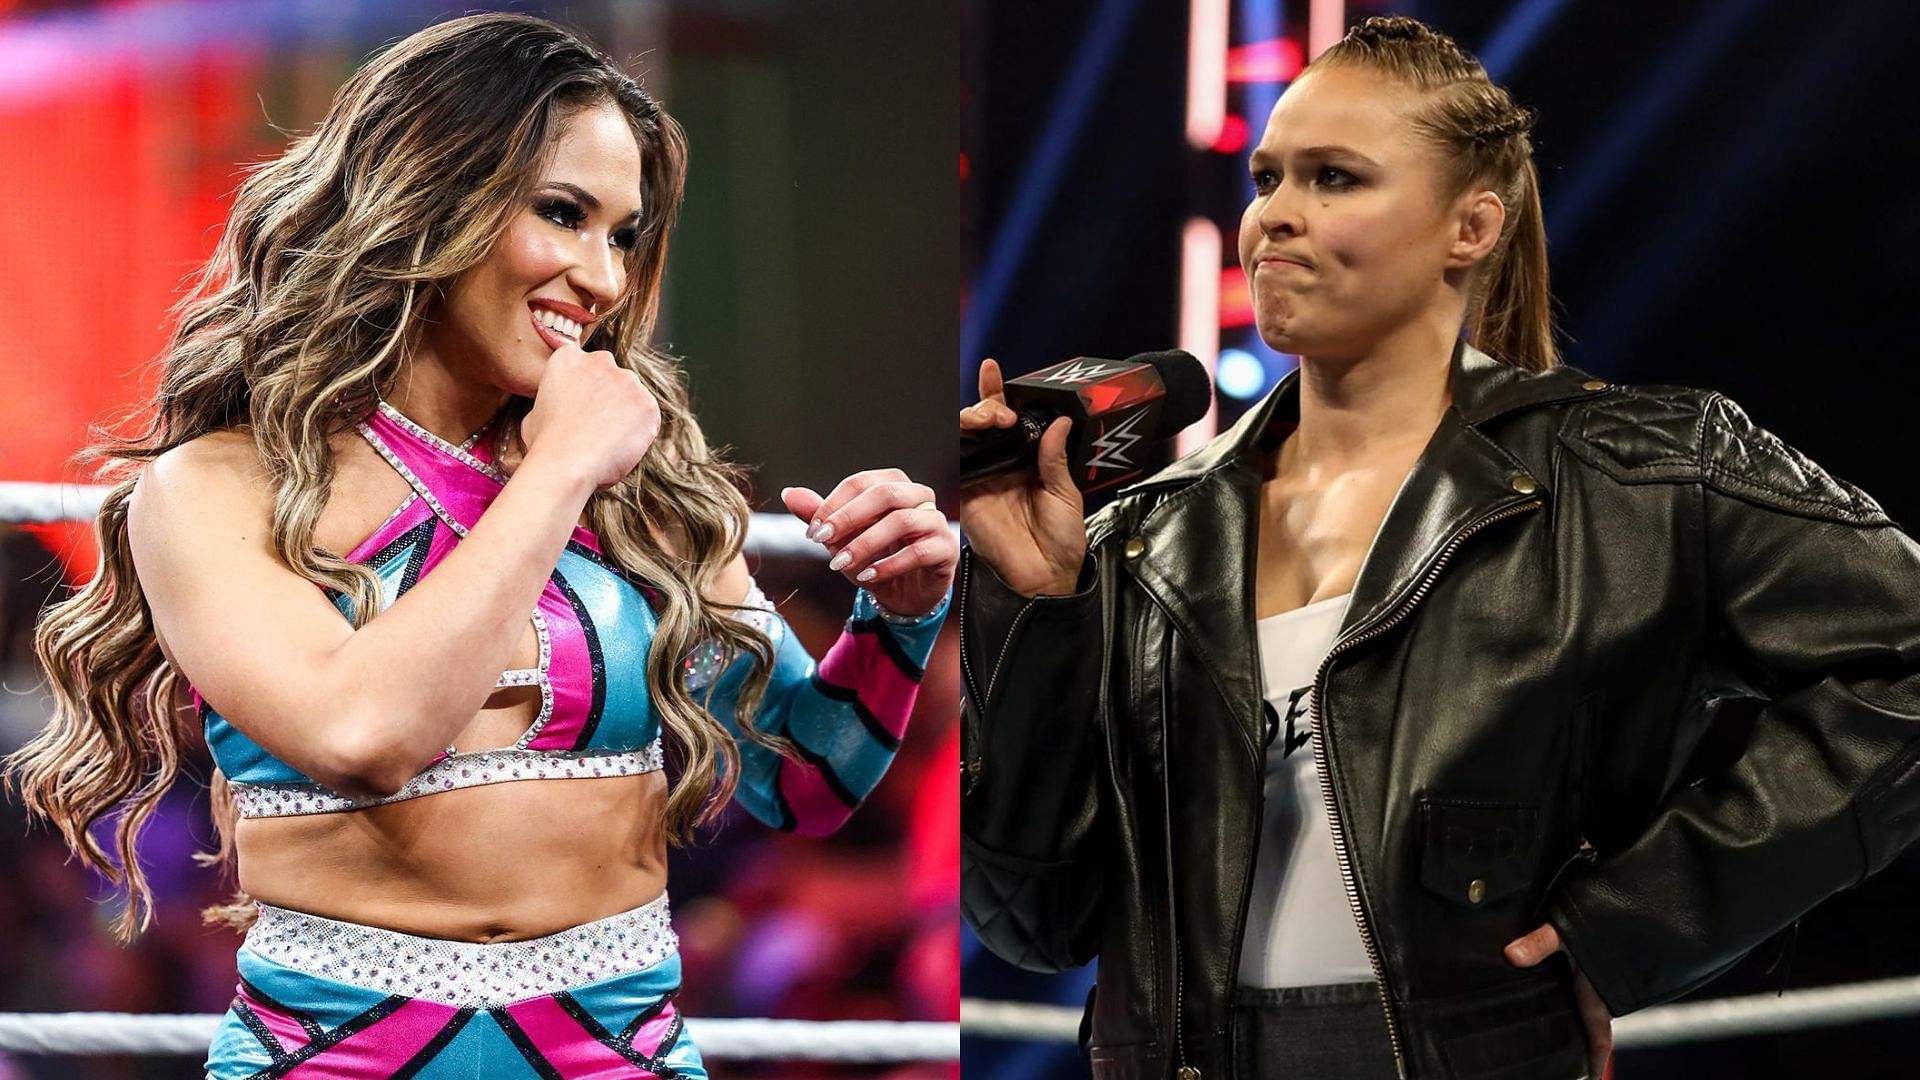 Lola Vice sent a two-word message to Ronda Rousey